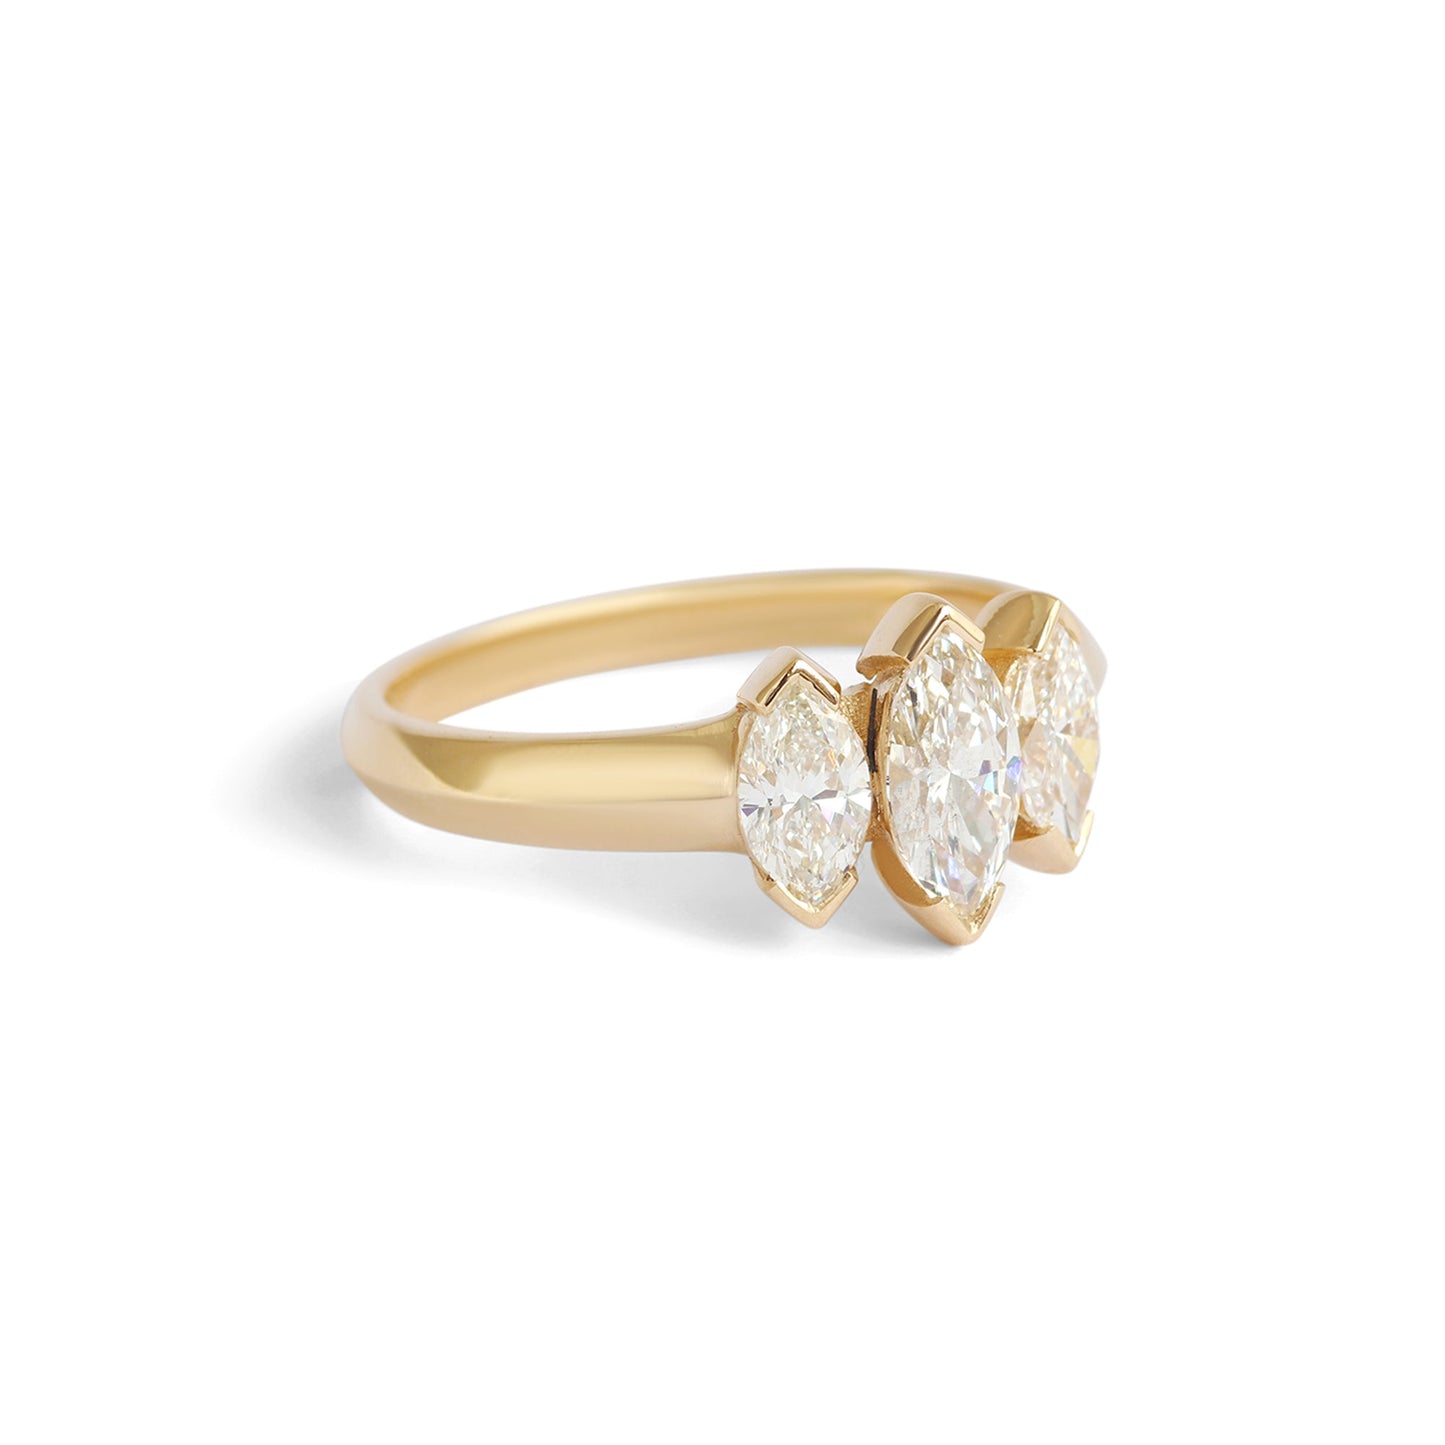 Load image into Gallery viewer, Triptych Ring / Lab Marquise Diamonds 1ct - Goldpoint Studio - Greenpoint, Brooklyn - Fine Jewelry
